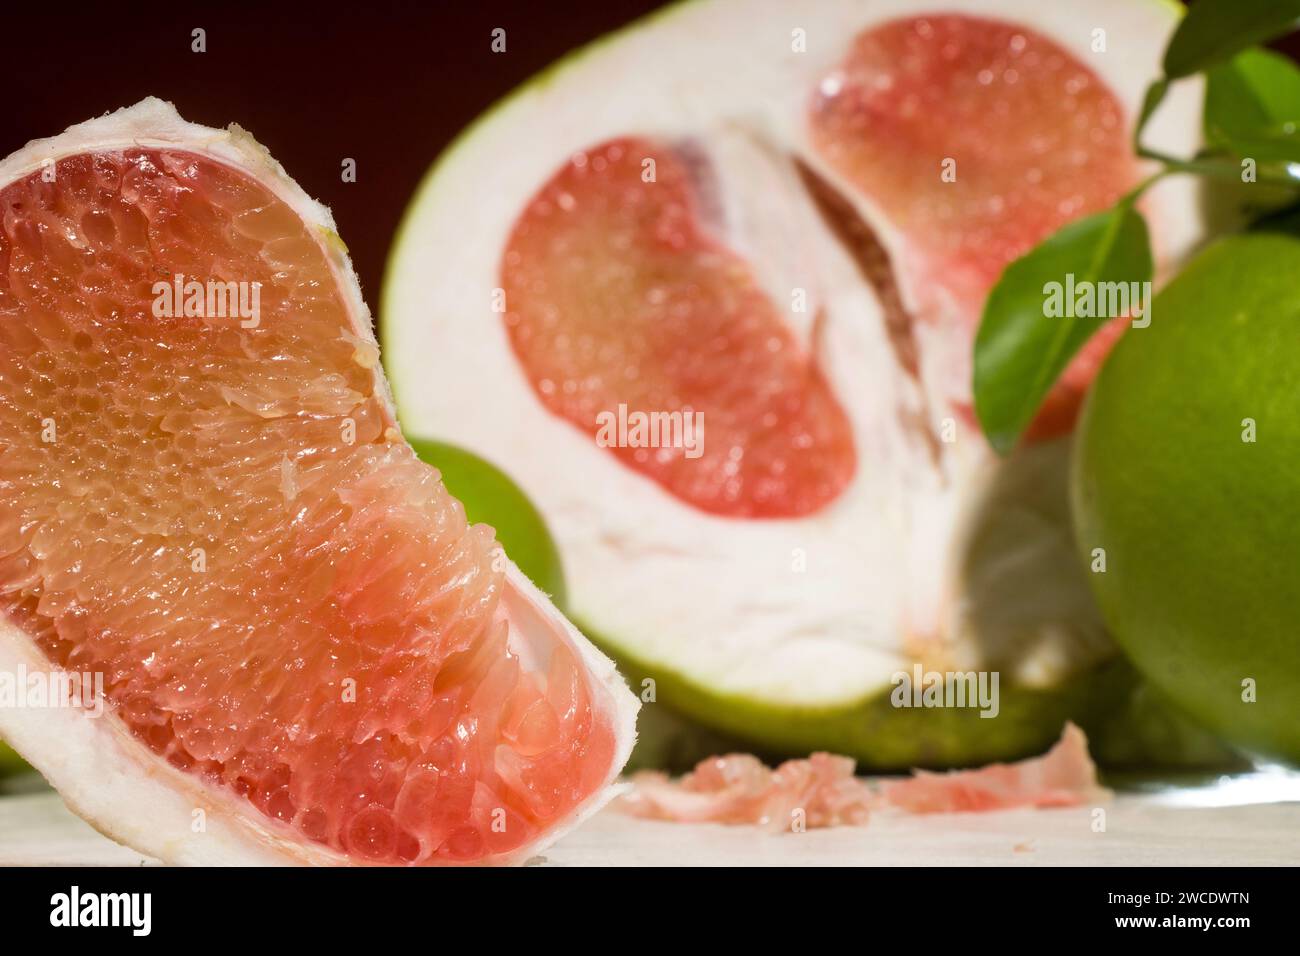 pieces of red Pomelo fruit on an orange background Stock Photo